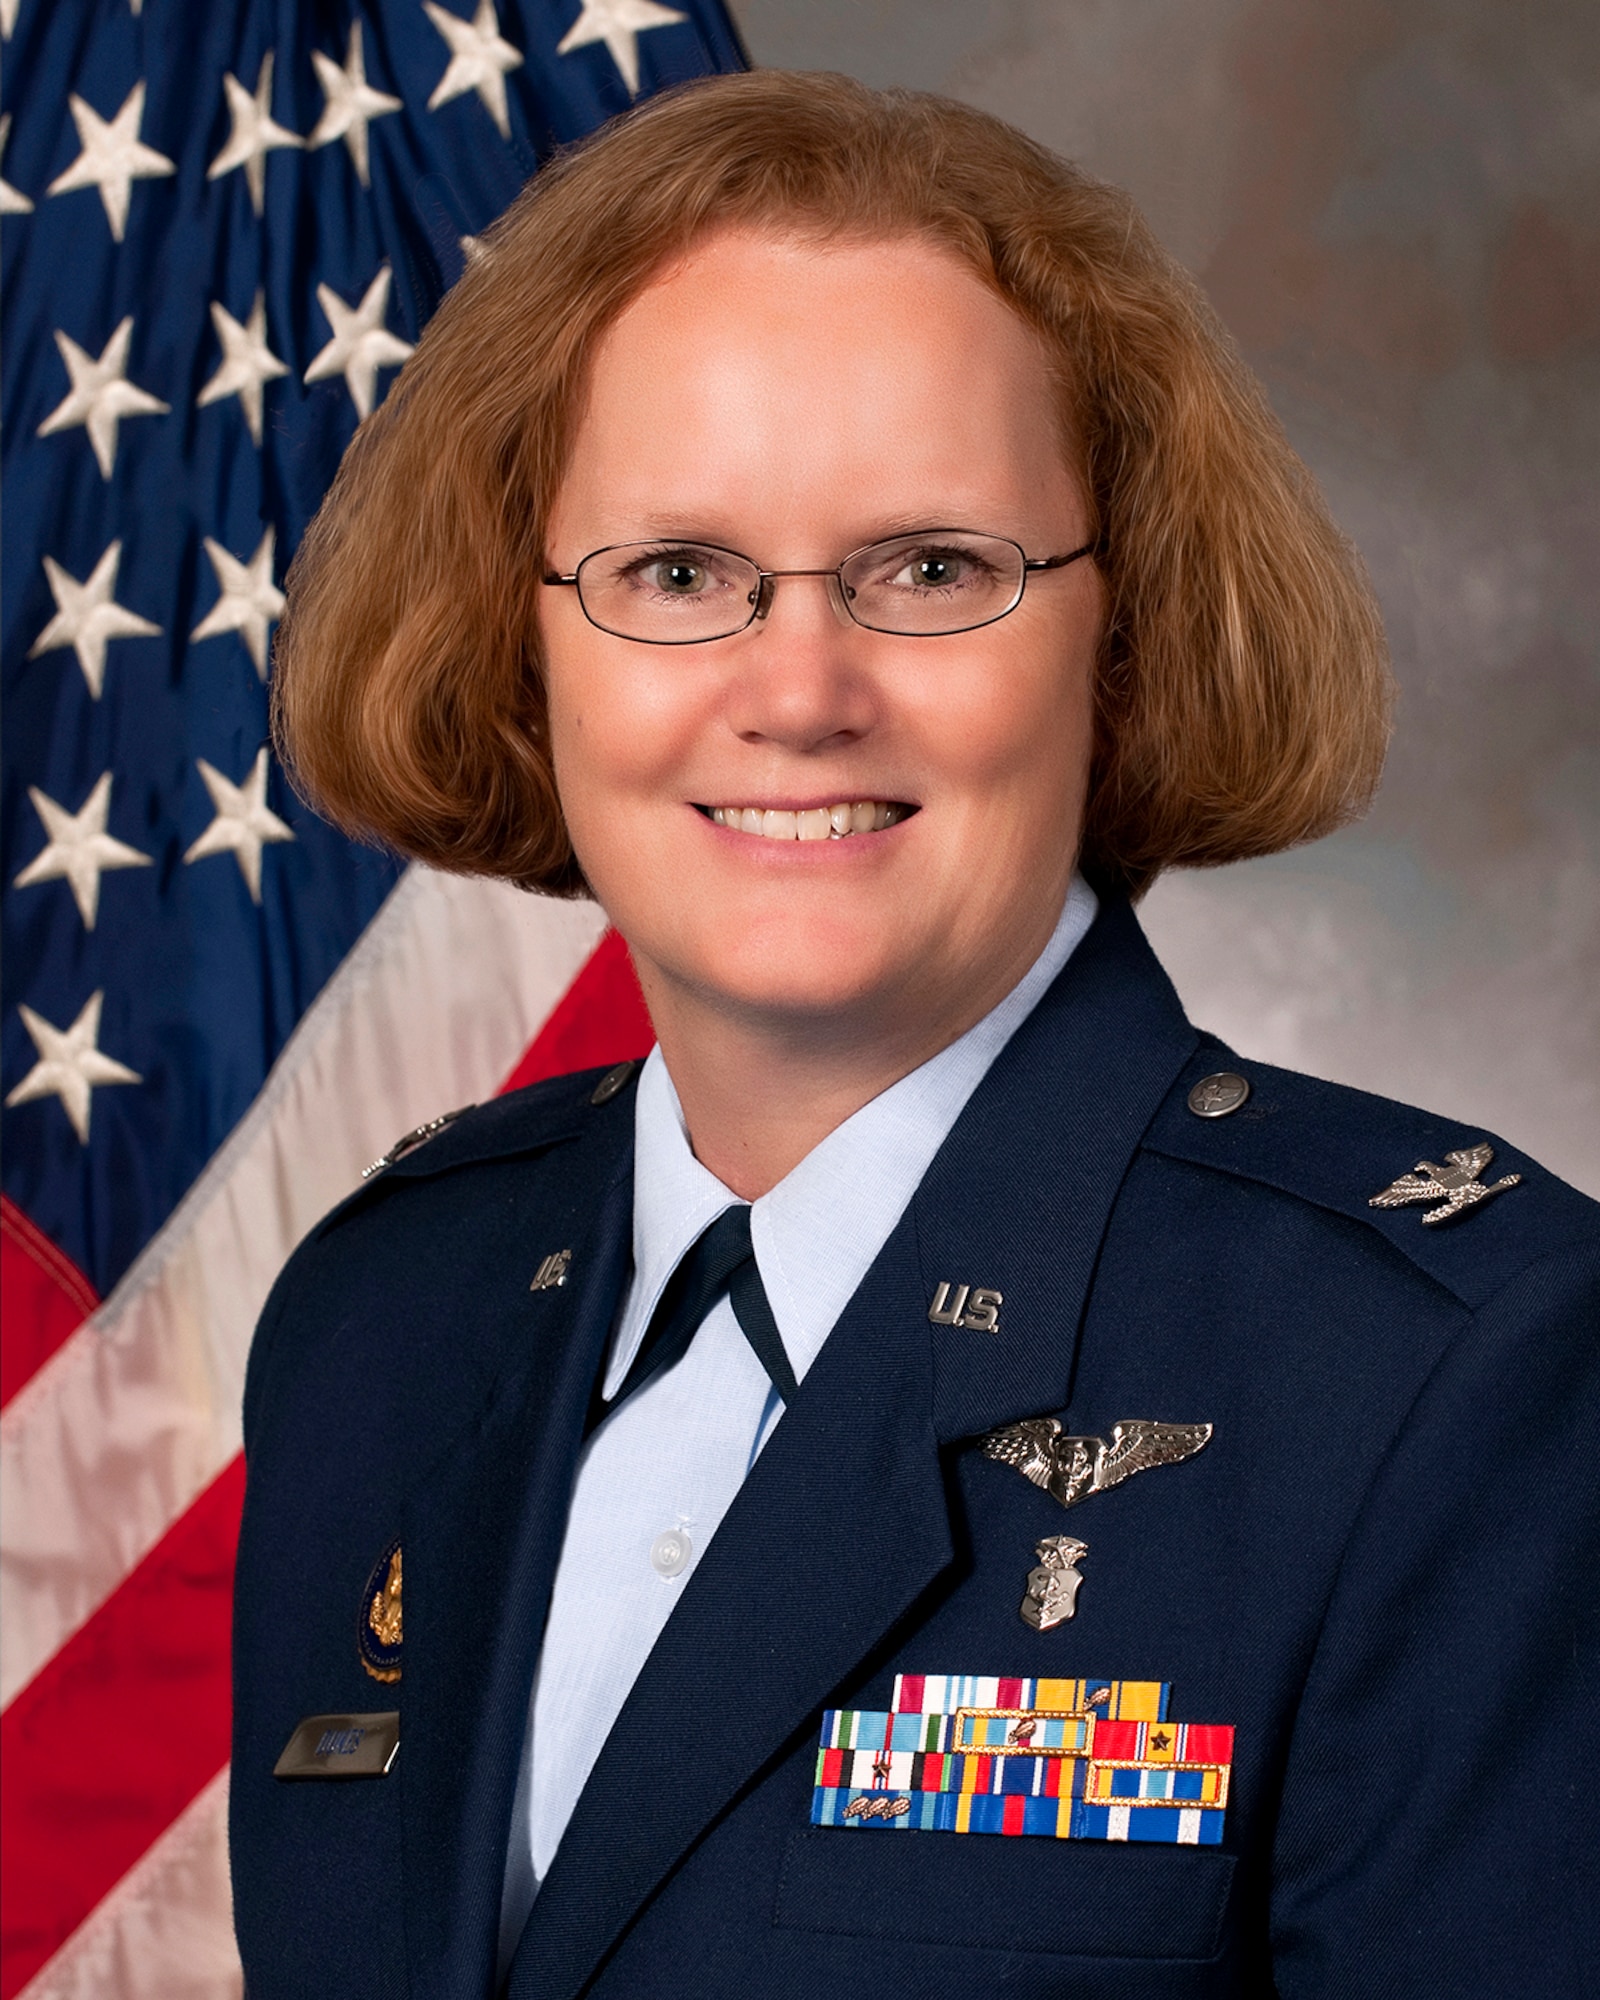 Col. Susan Dukes, Commandant of the Daniel K. Inouye Graduate School of Nursing at the Uniformed Services University of the Health Sciences, is the lead nurse scientist in the AFMS. As a lesser known nurse specialty, nurse scientists generate valuable new knowledge for the AFMS and improve patient care by leading research focused on nursing related issues.